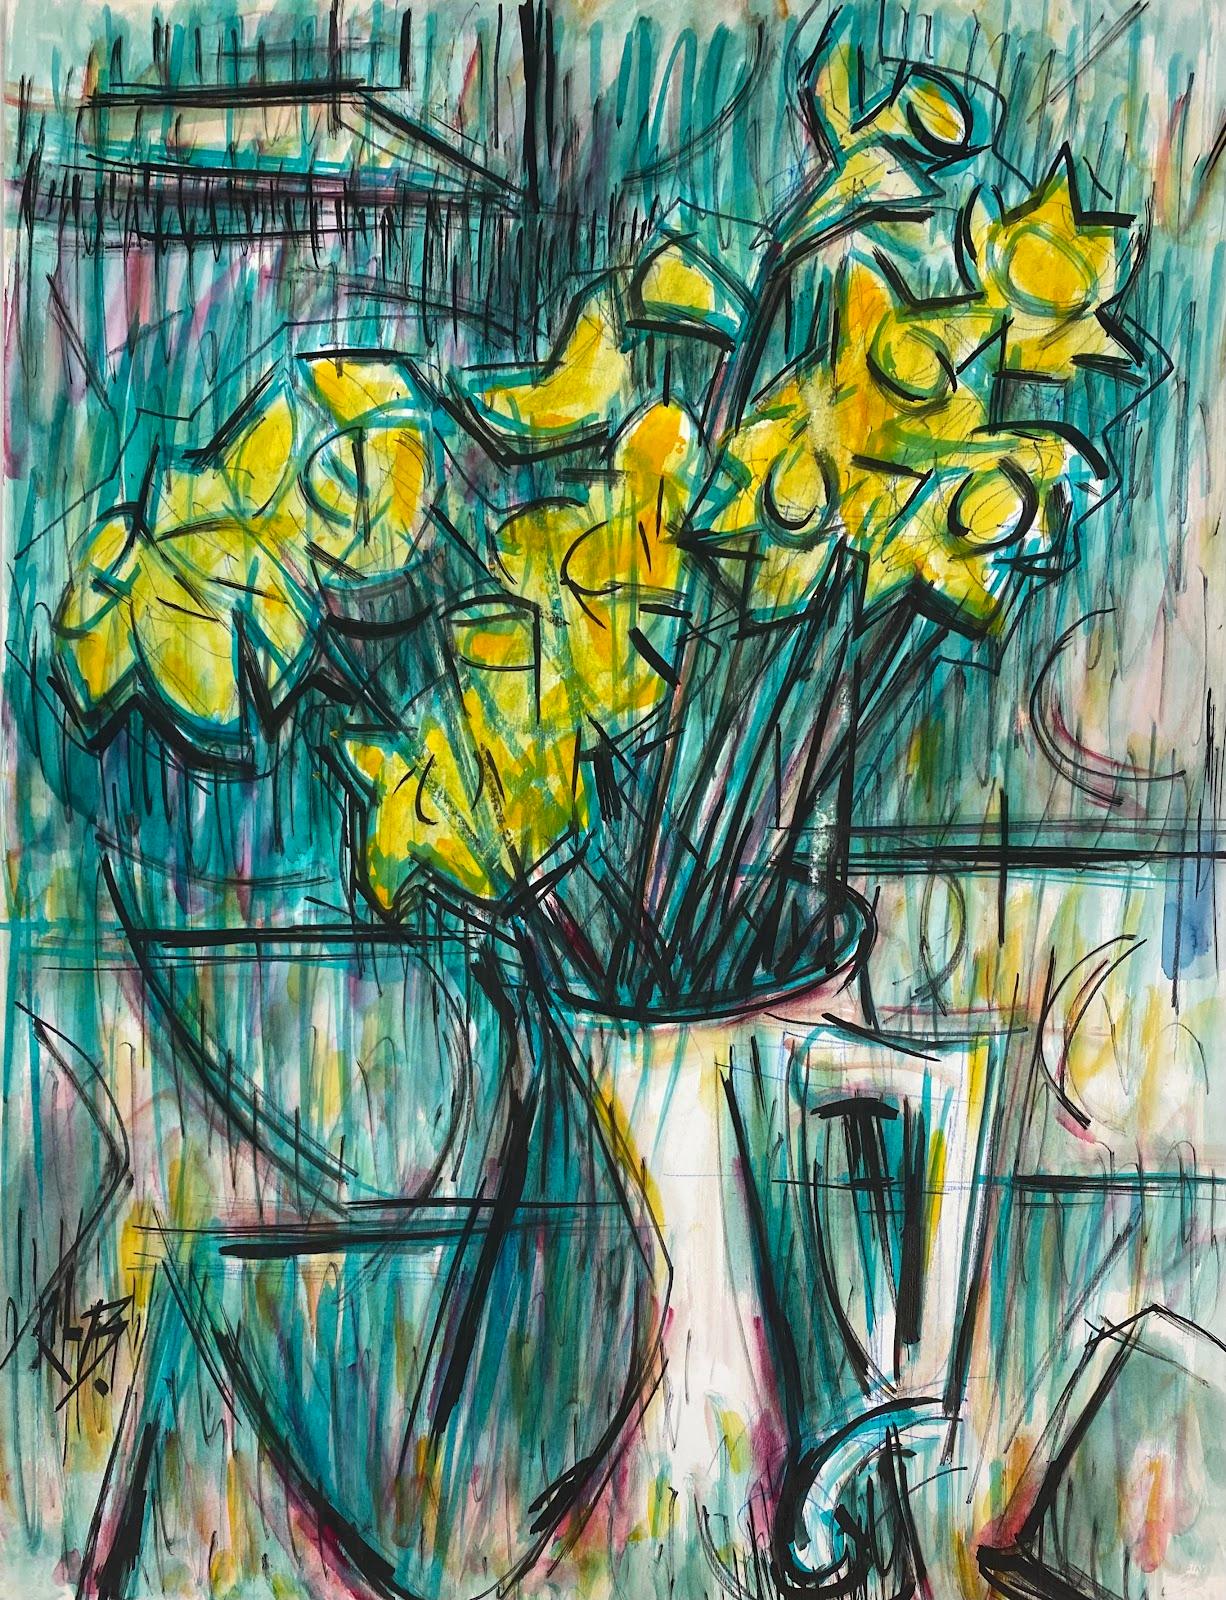 Paul-Louis Bolot (French 1918-2003) Still-Life Painting - 20th Century French Modernist Painting Of Yellow Daffodils